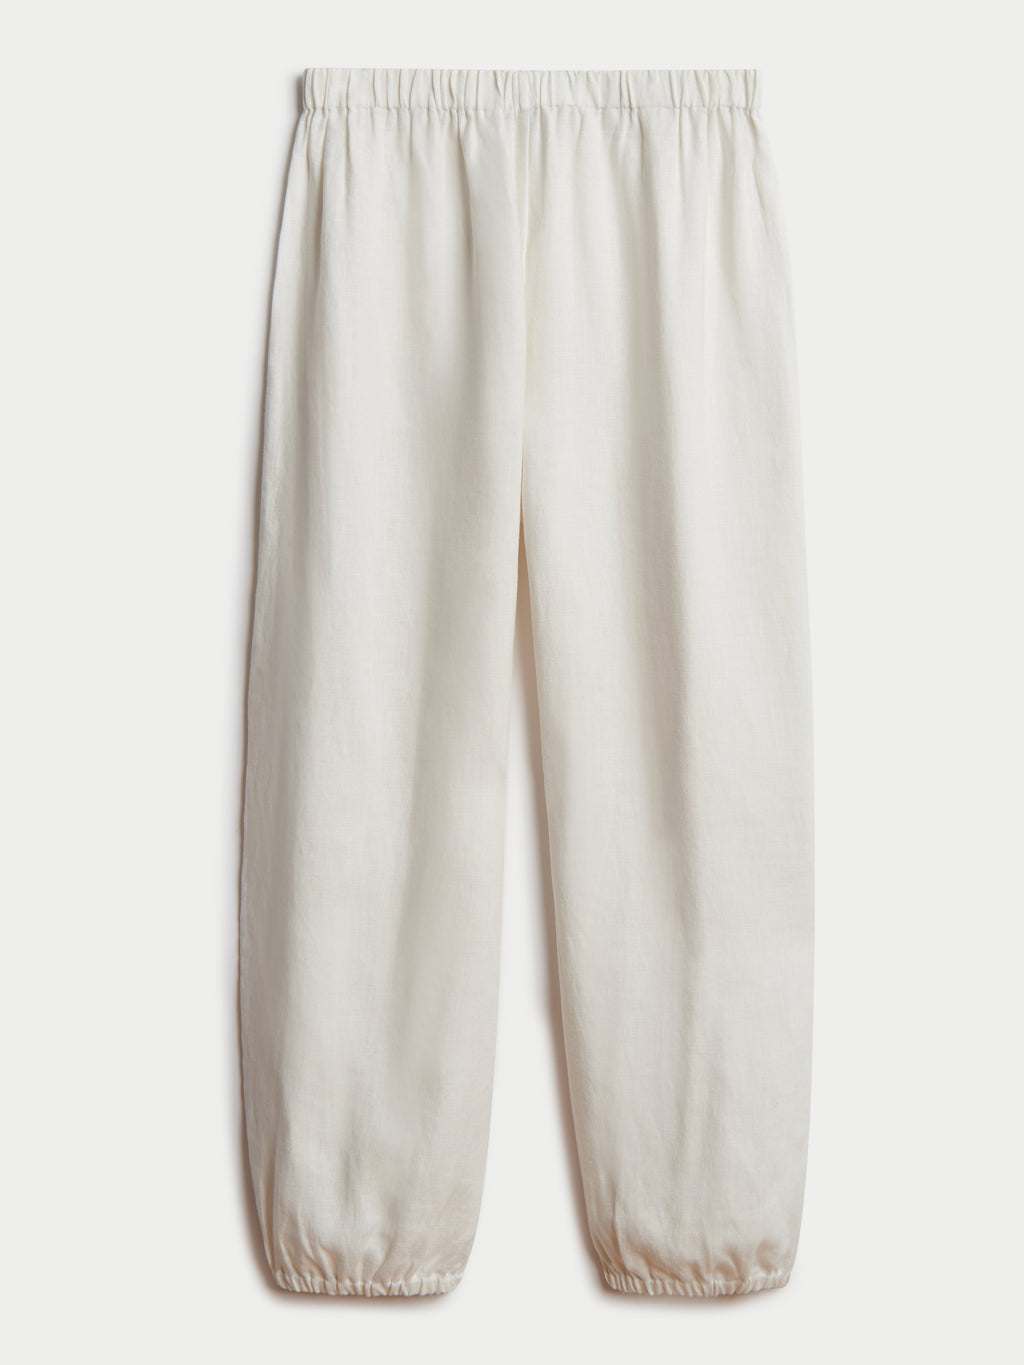 Women's White Linen Pants  100% Made to measure - Sumissura